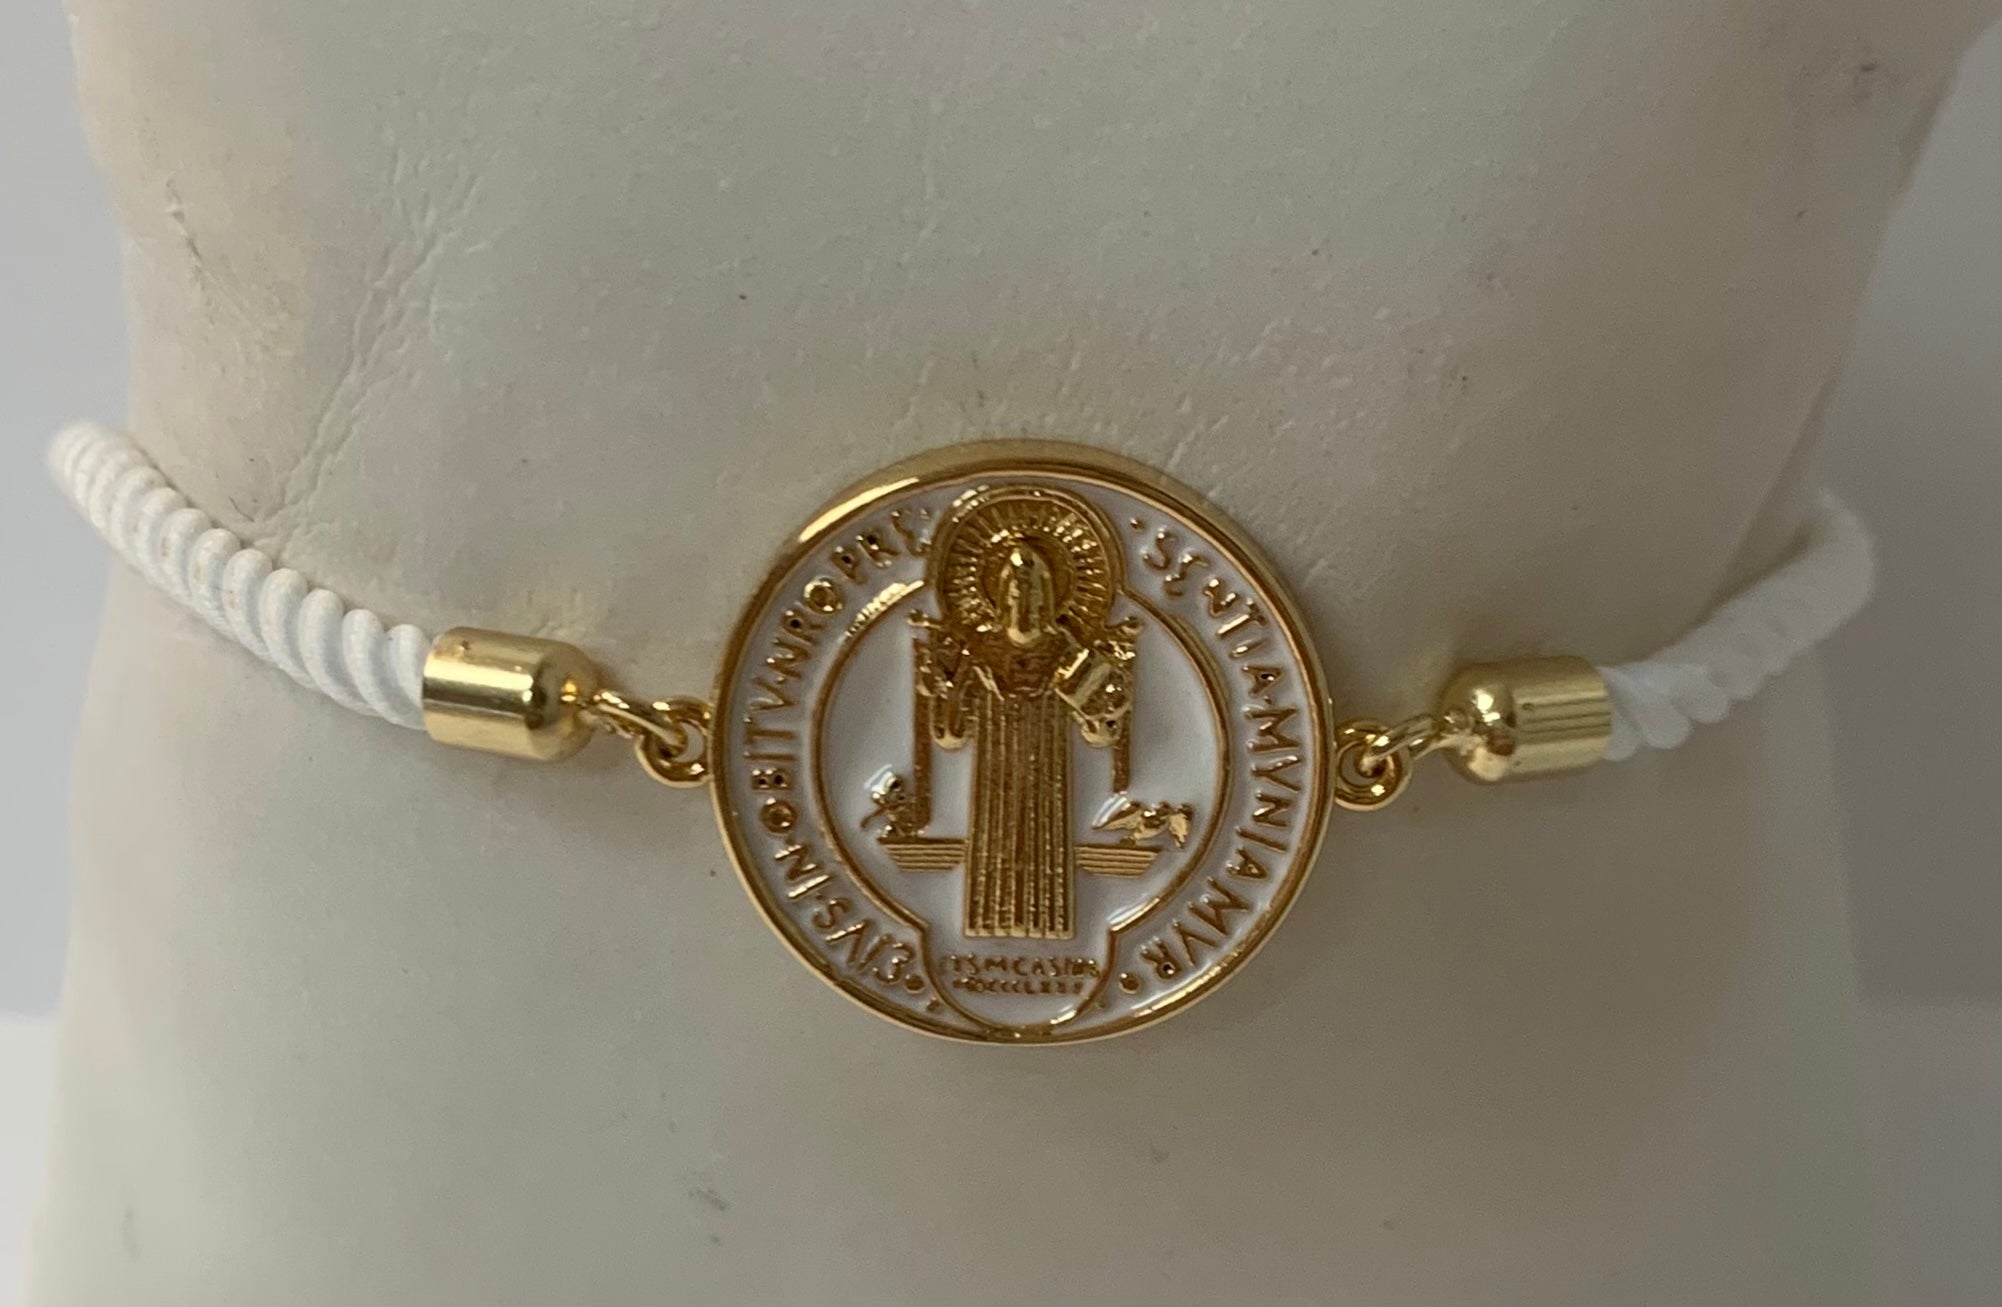 Cord bracelet with St Benedict medal